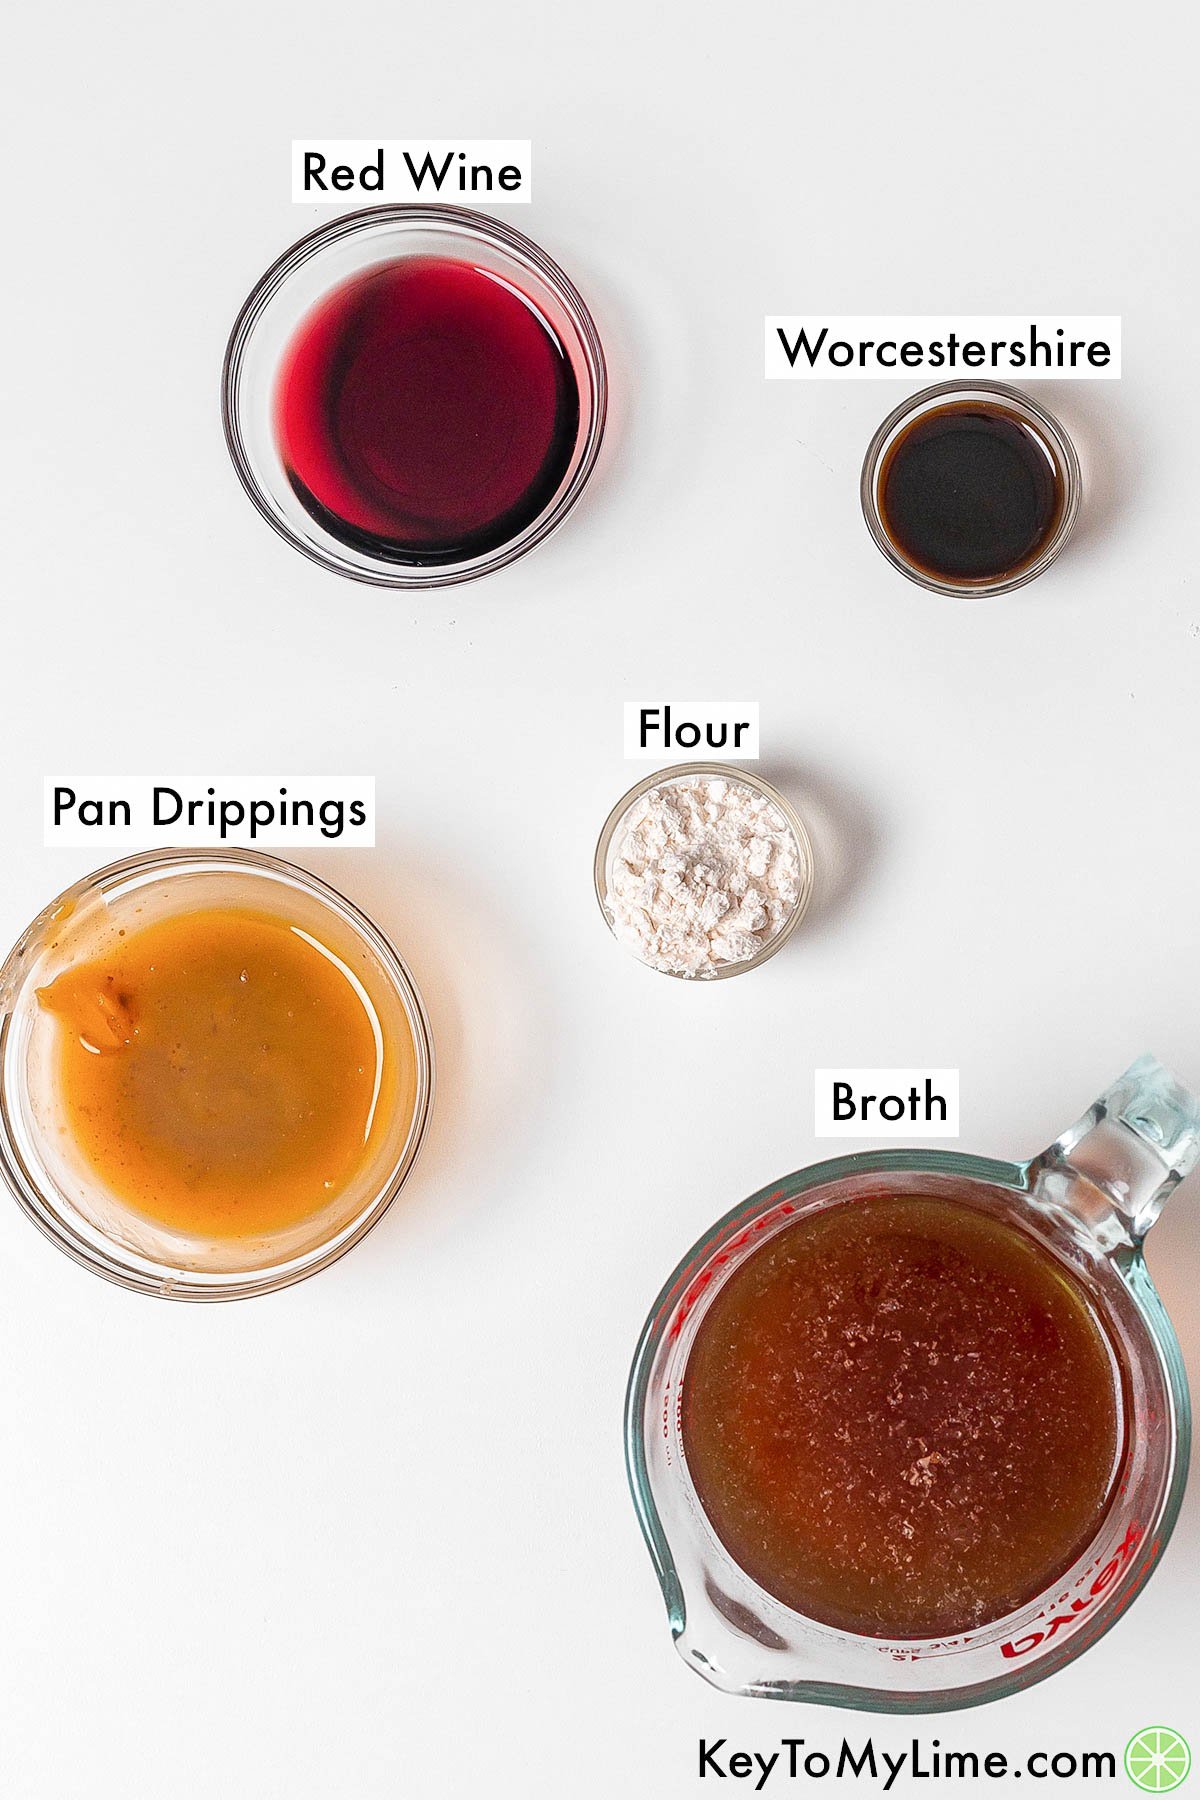 The labeled ingredients for au jus.